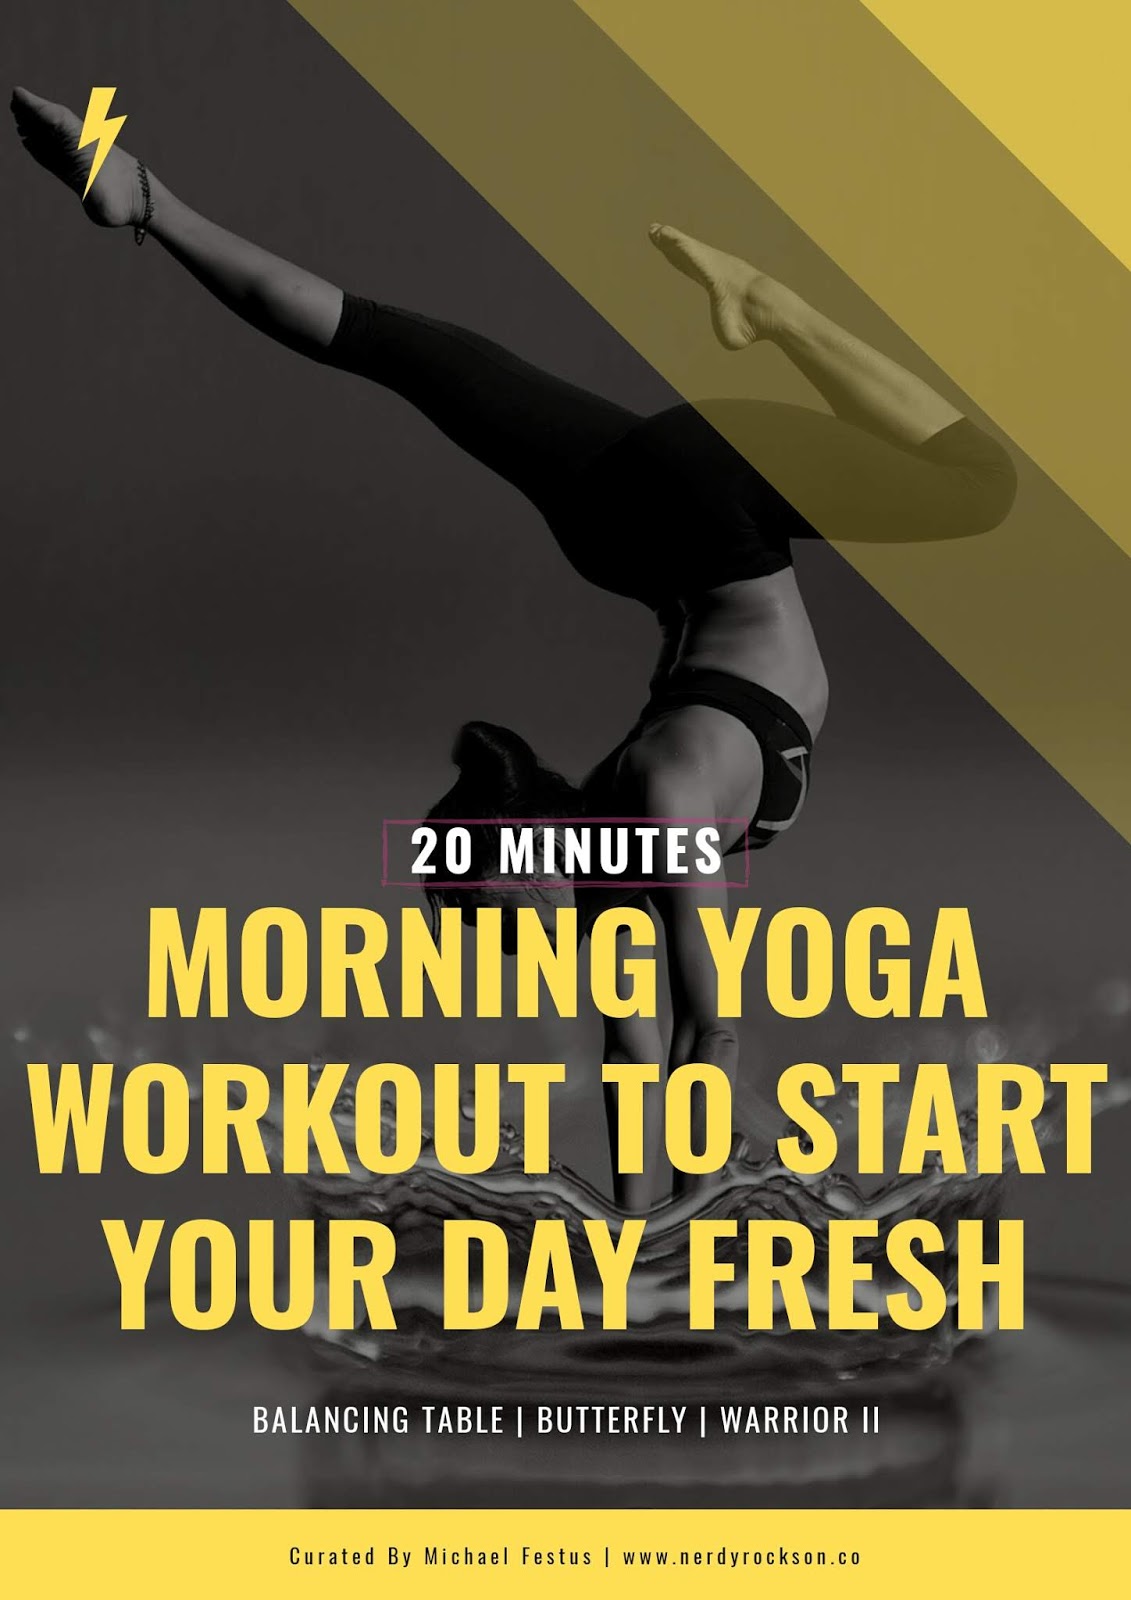 20 Minute Morning Yoga Workout to Start Your Day Fresh